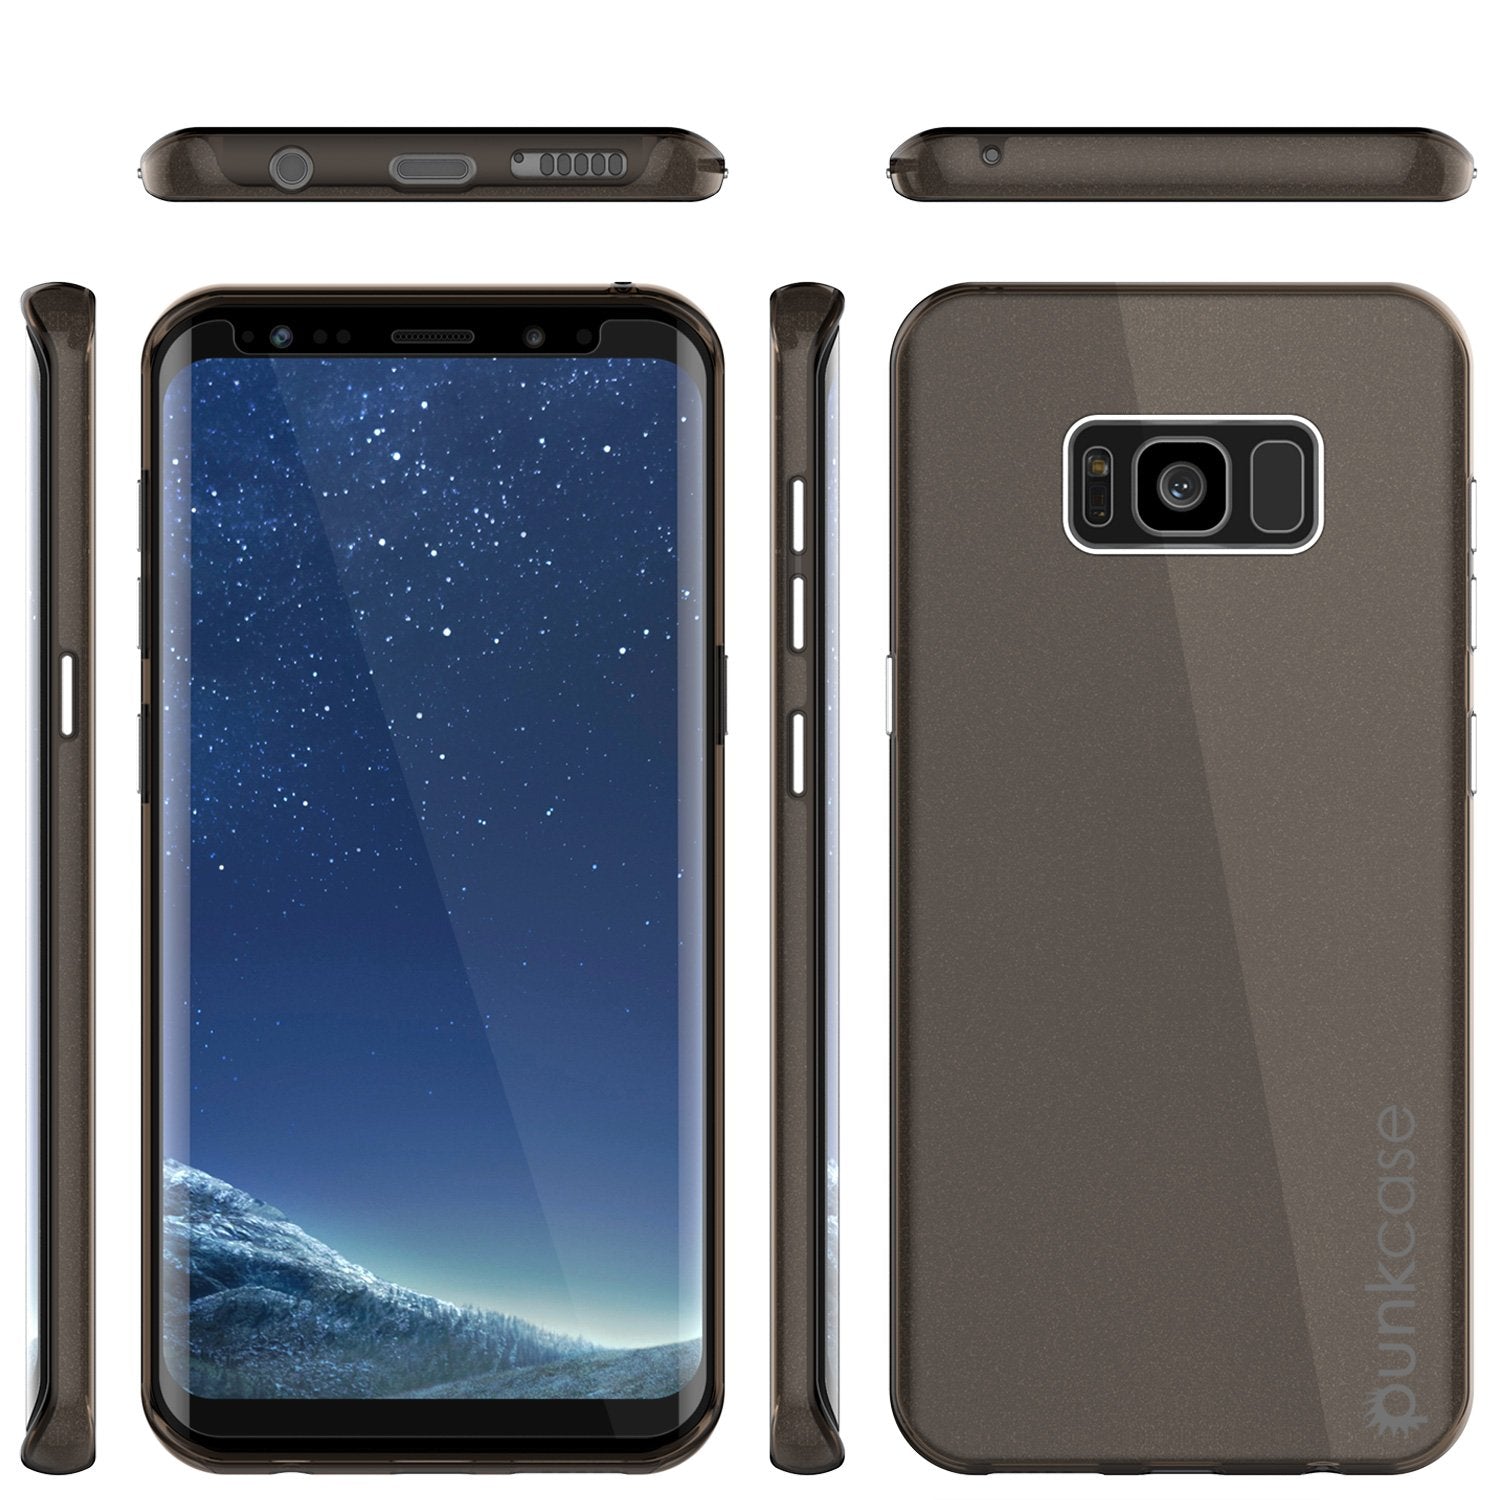 Galaxy S8 Case, Punkcase Galactic 2.0 Series Ultra Slim Protective Armor TPU Cover w/ PunkShield Screen Protector | Lifetime Exchange Warranty | Designed for Samsung Galaxy S8 [Black/grey] - PunkCase NZ